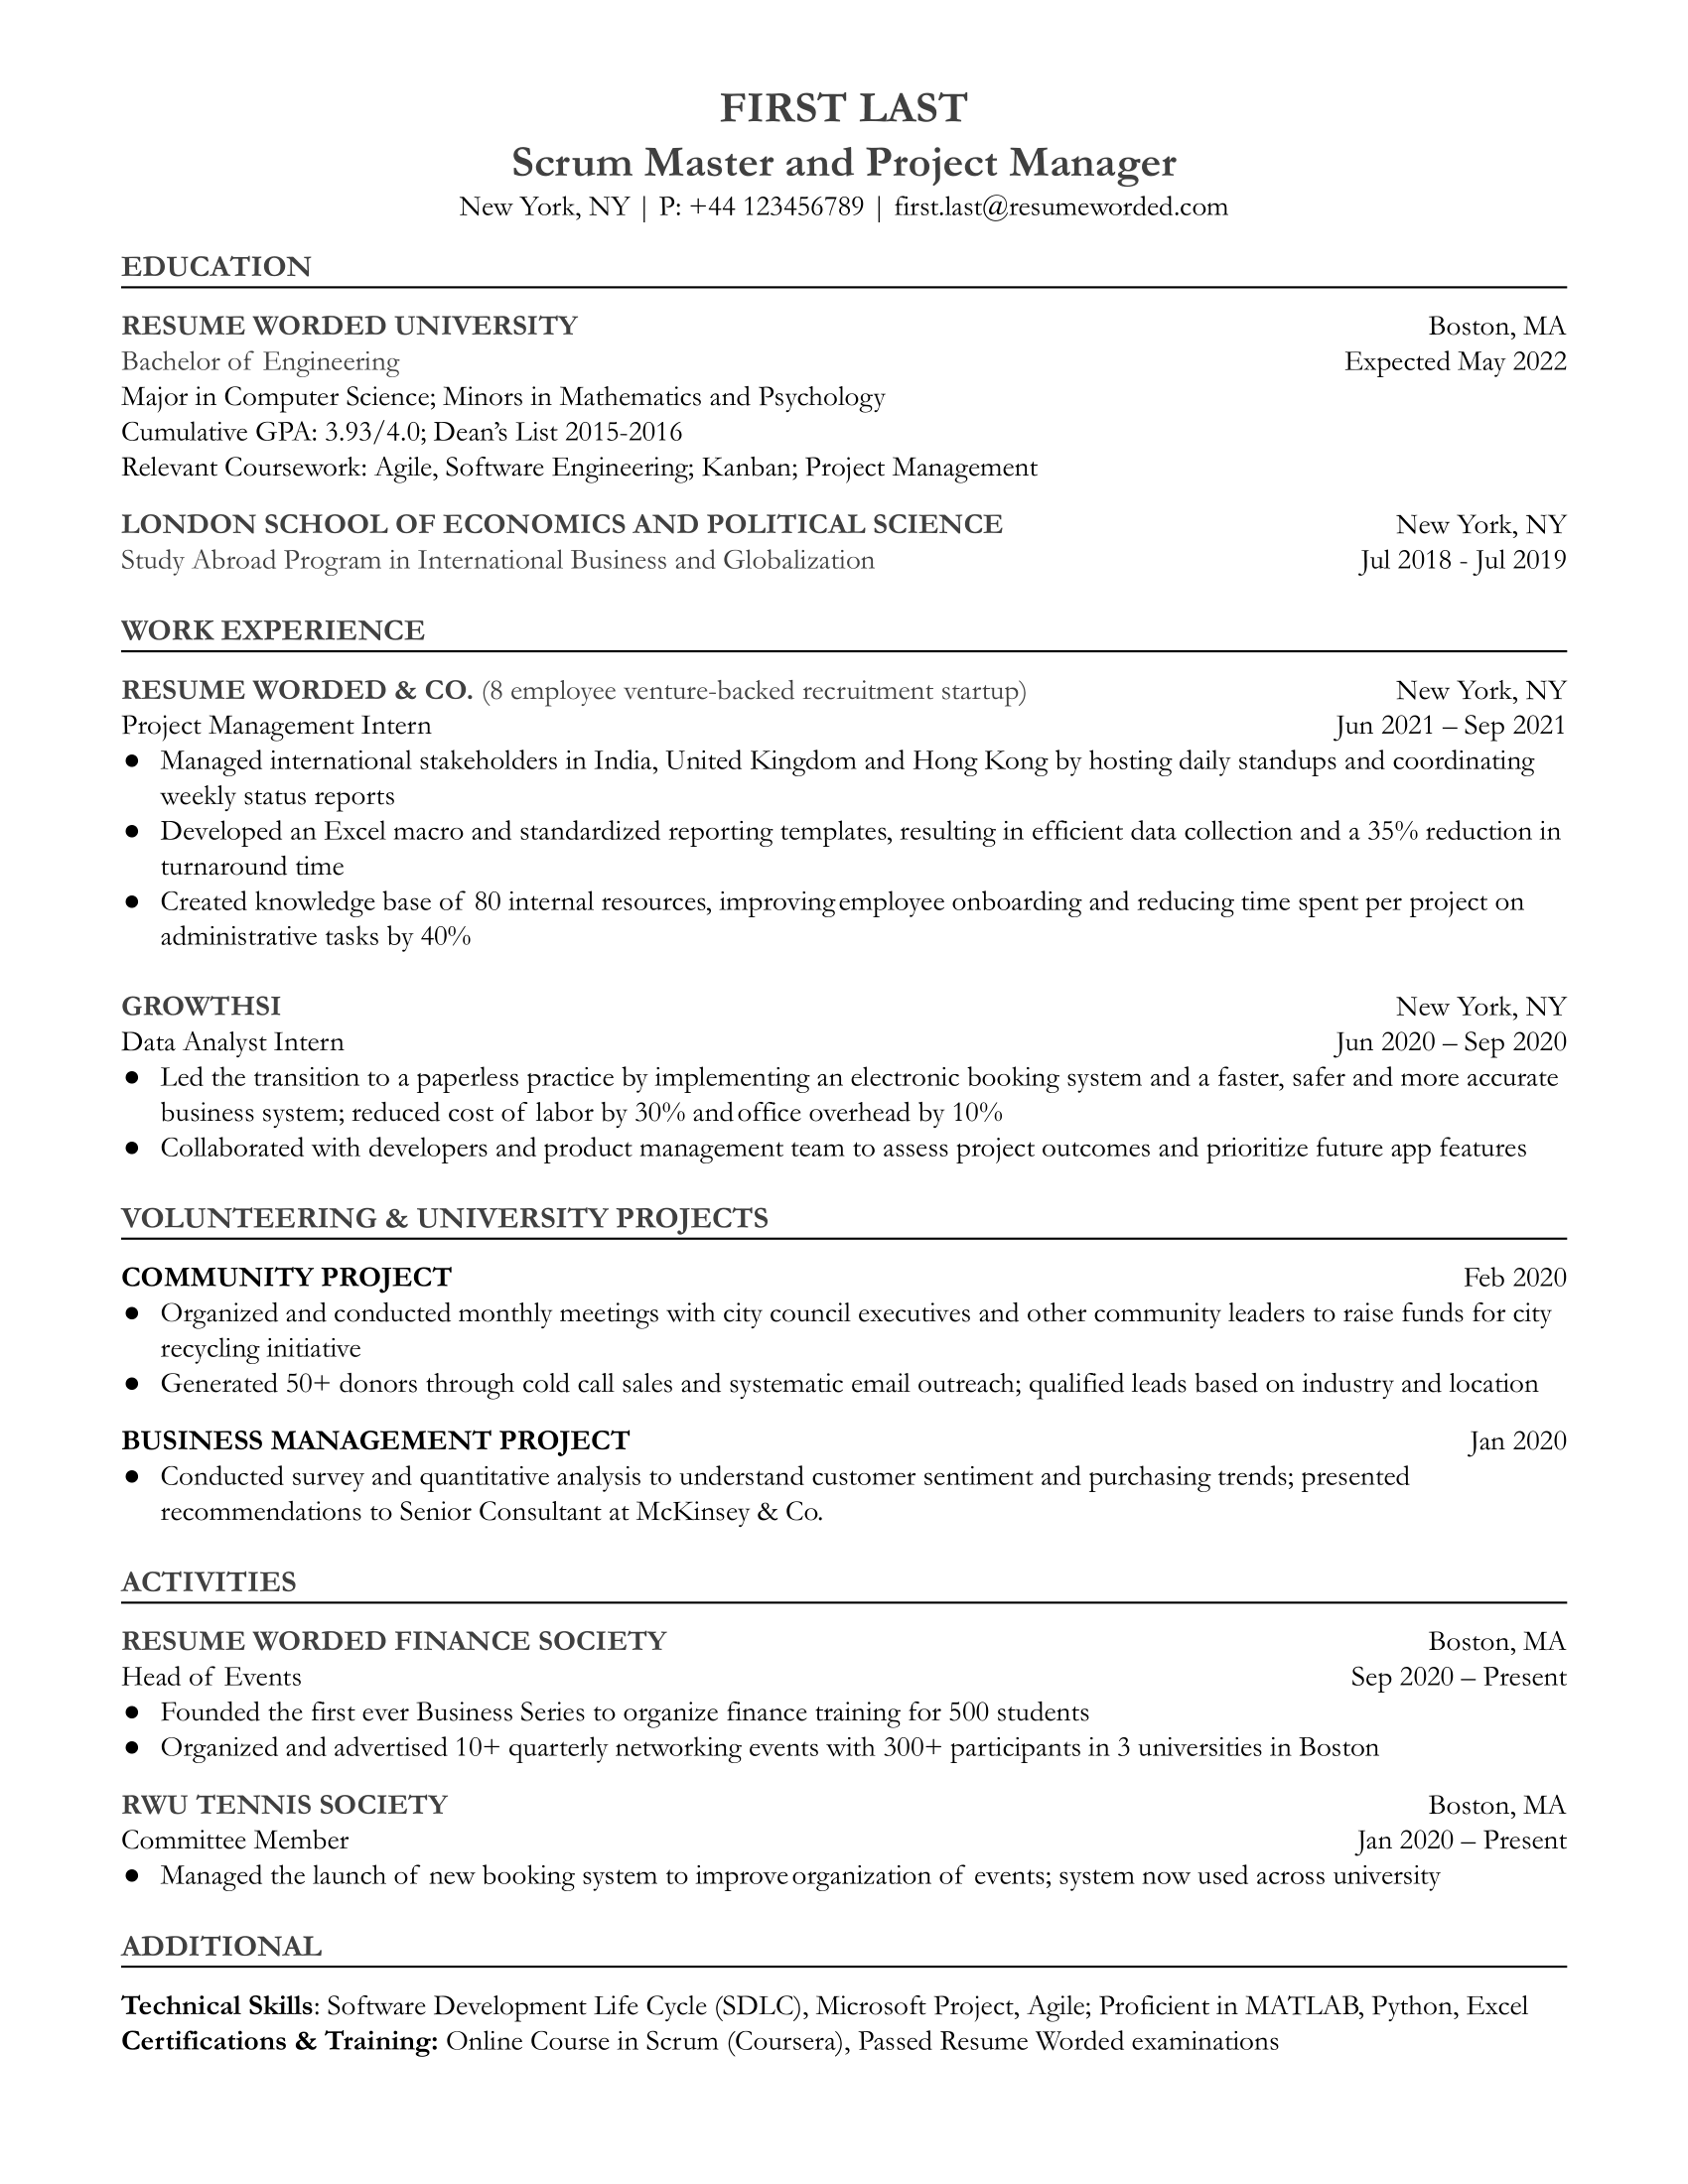 An entry level scrum master resume that highlights education, internship experience, volunteer and project management experience, activities, and technical skills. 